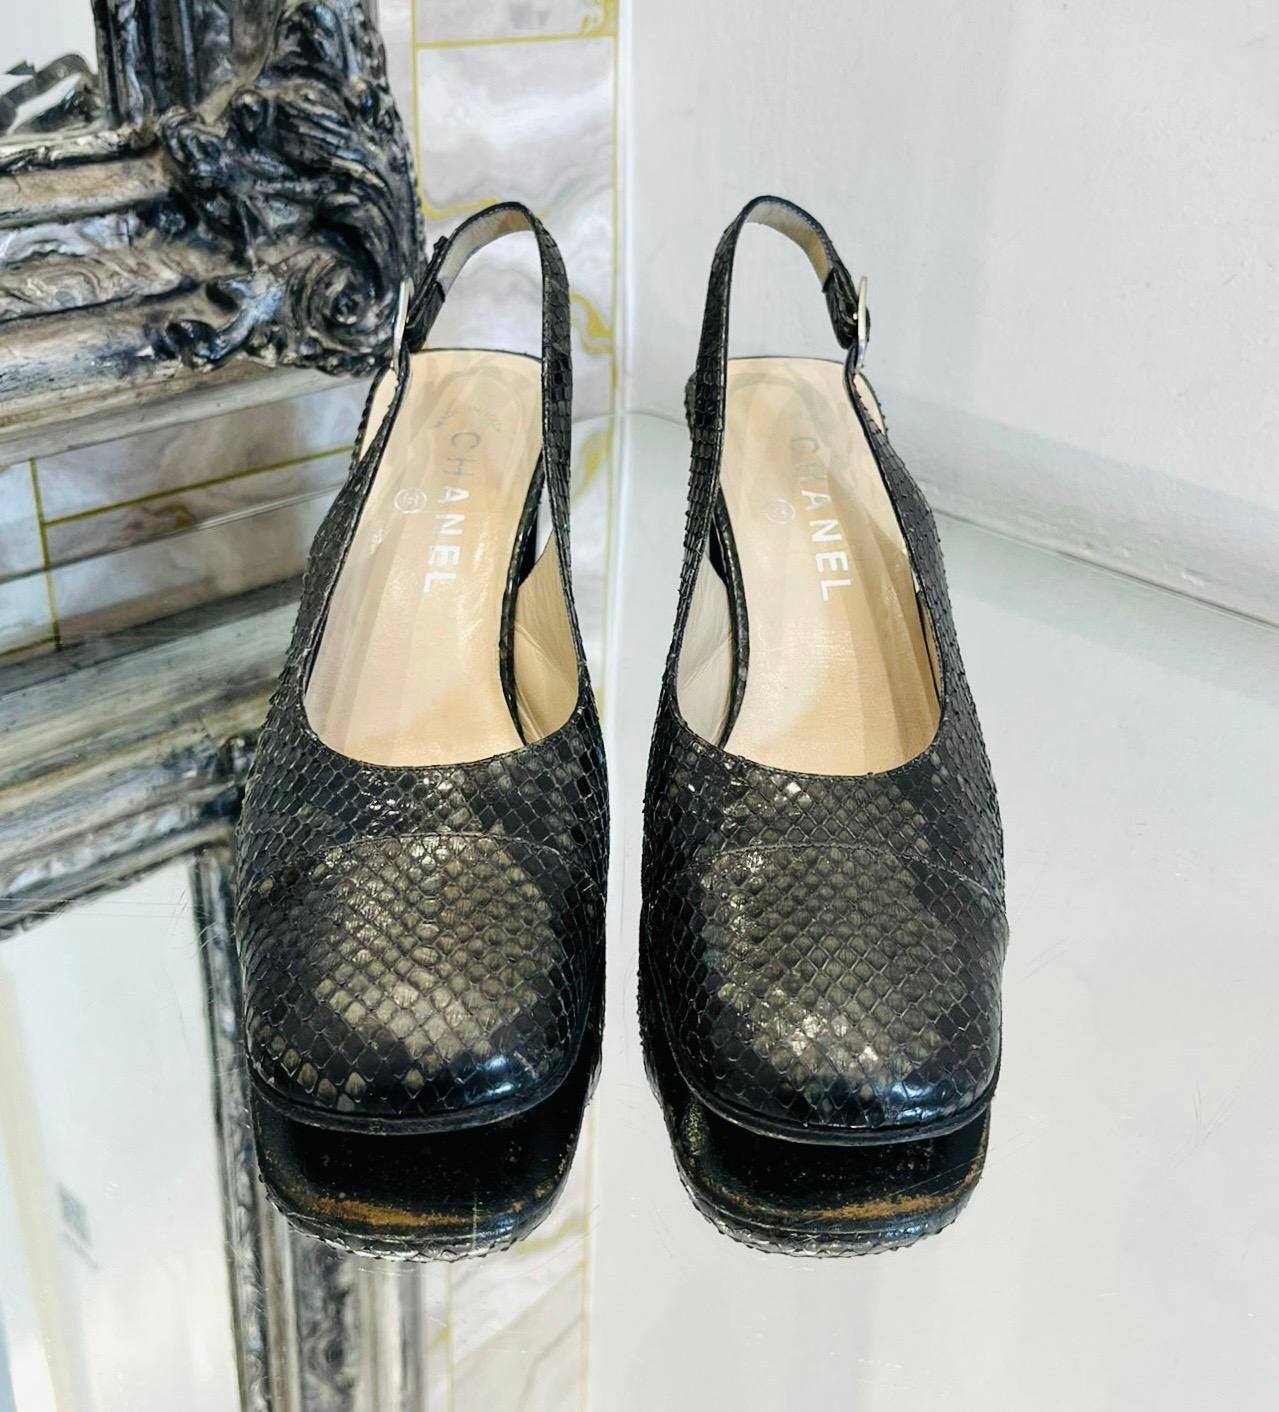 Chanel Snakeskin Slingback Pumps

Black heels crafted from snakeskin leather and designed with greenish grey reflection effect.

Featuring square toes and high block heel styled with silver 'Chanel' engraved detail.

Having 'CC' logo adjustable,